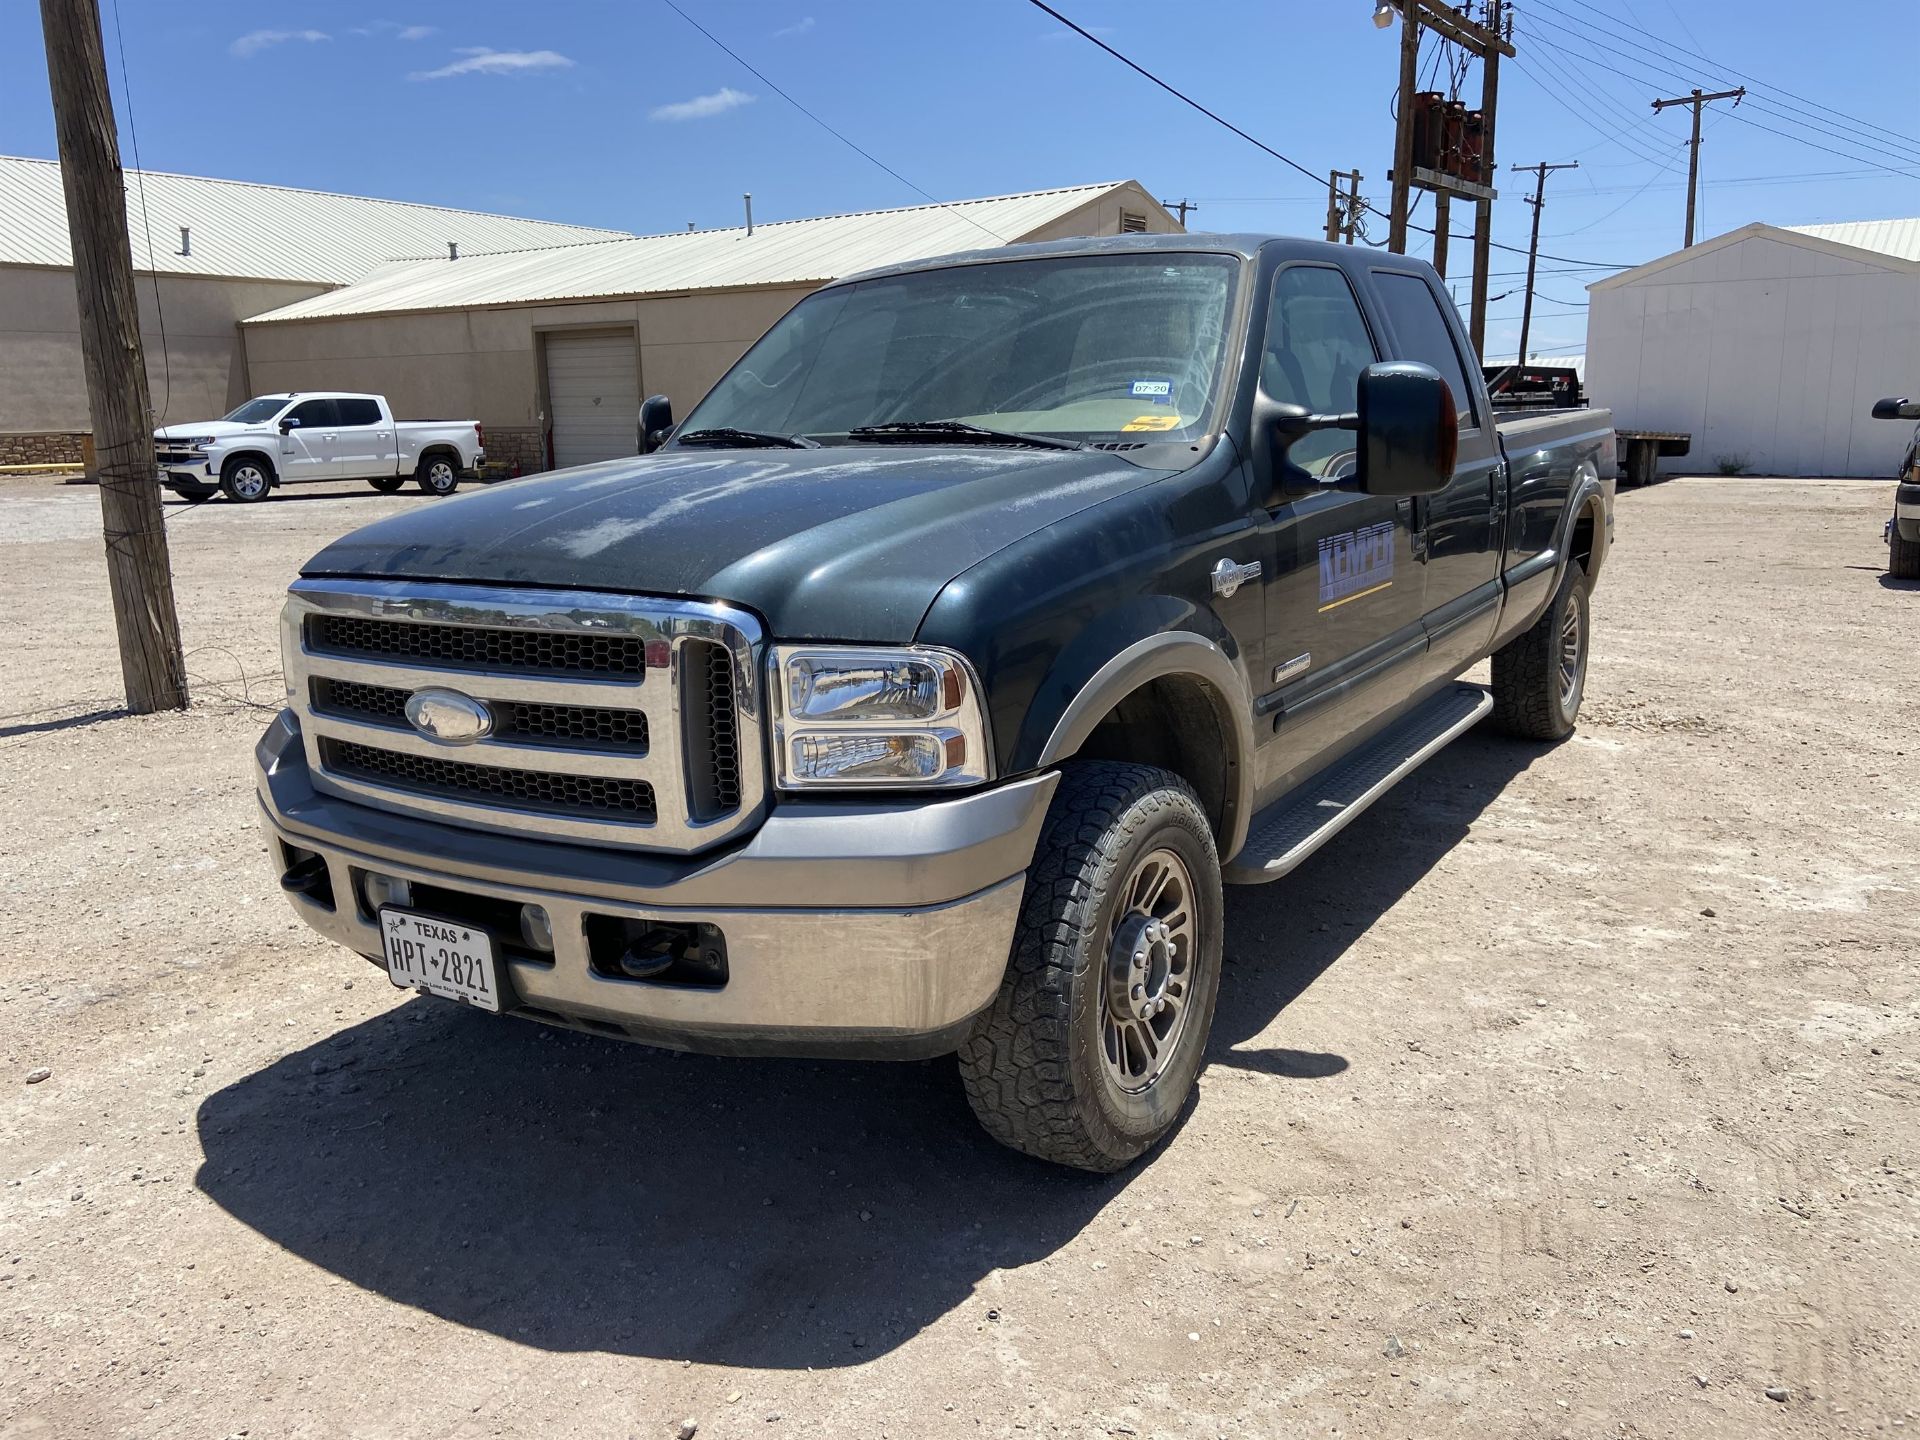 2005 Ford F350 King Ranch SRW 4x4 Crew Cab Long Bed, Leather, 295K Miles, VIN # 1FTWW31P15EC32199